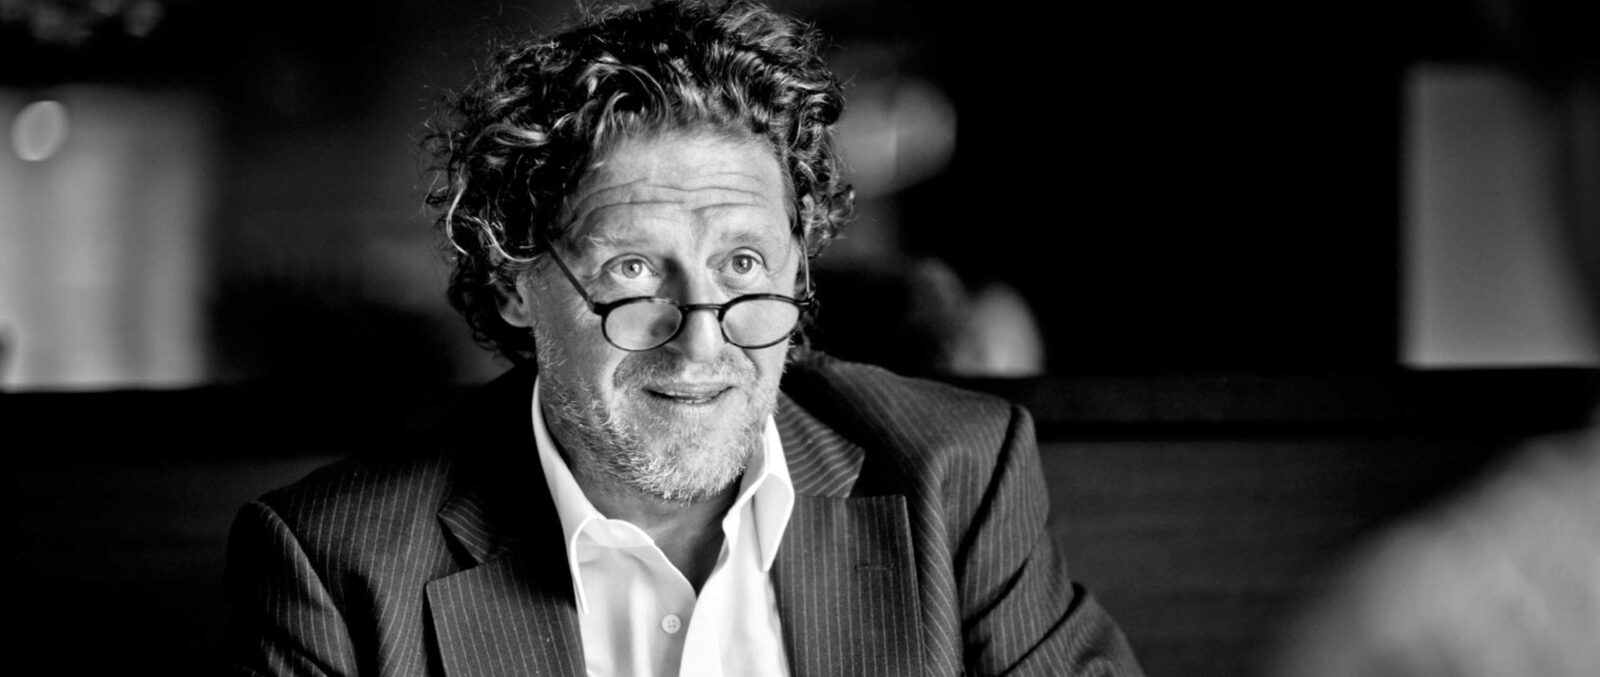 Marco Pierre White Feature 2 - A Gastronomy Experience Hosted by the Godfather of Modern British Cooking, Marco Pierre White in Scotland